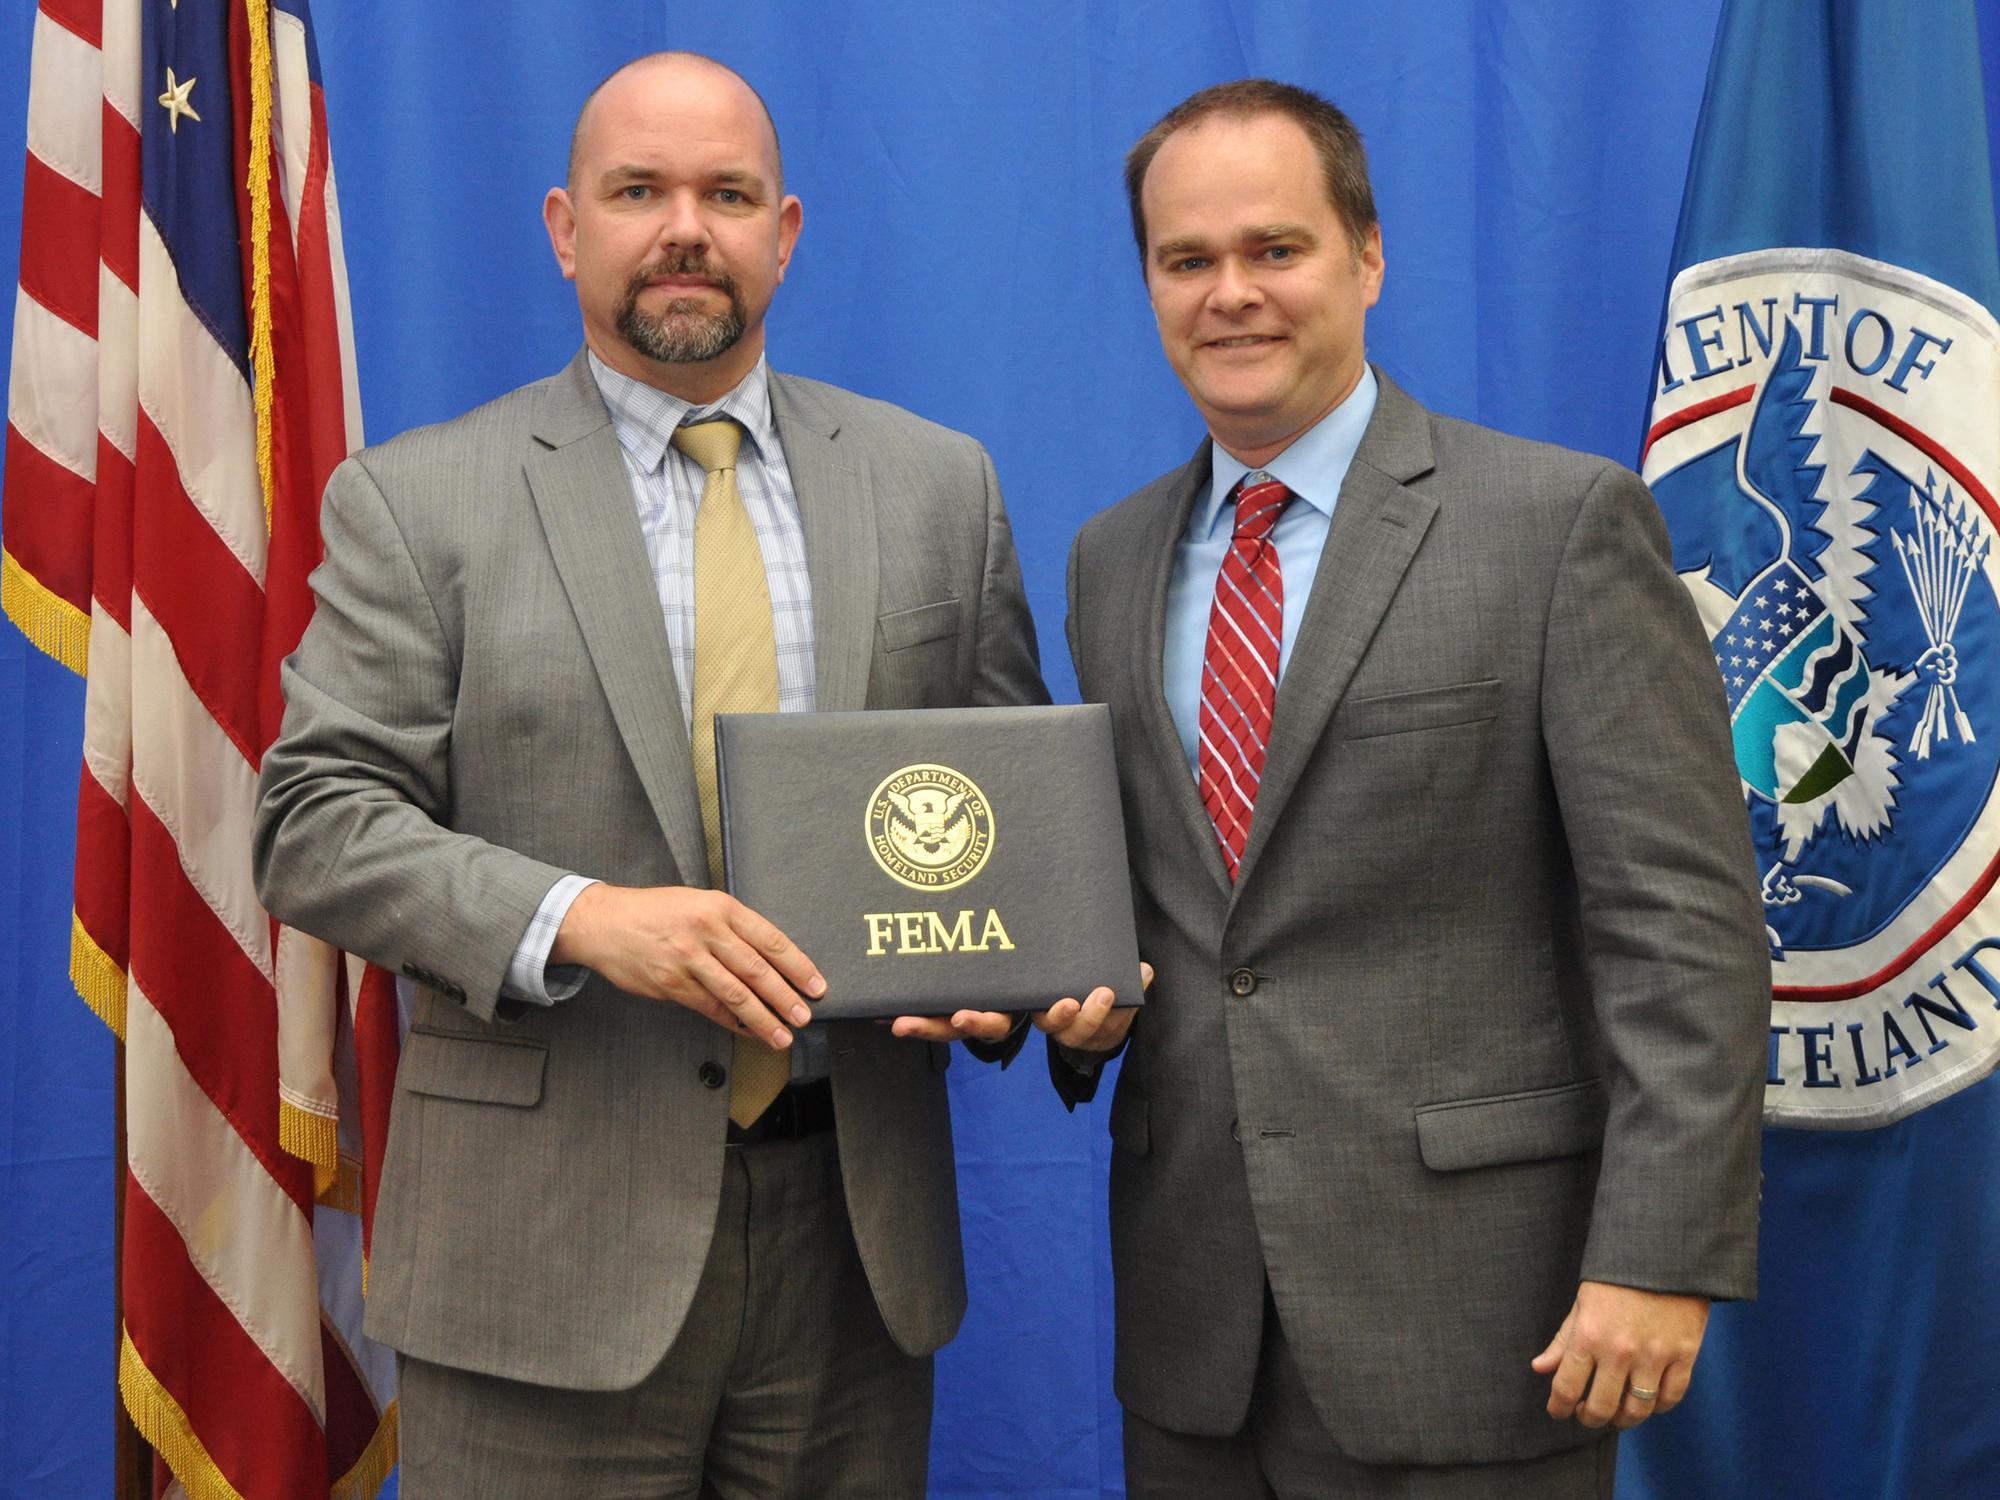 Two men on a stage holding a FEMA certificate and looking at the camera.